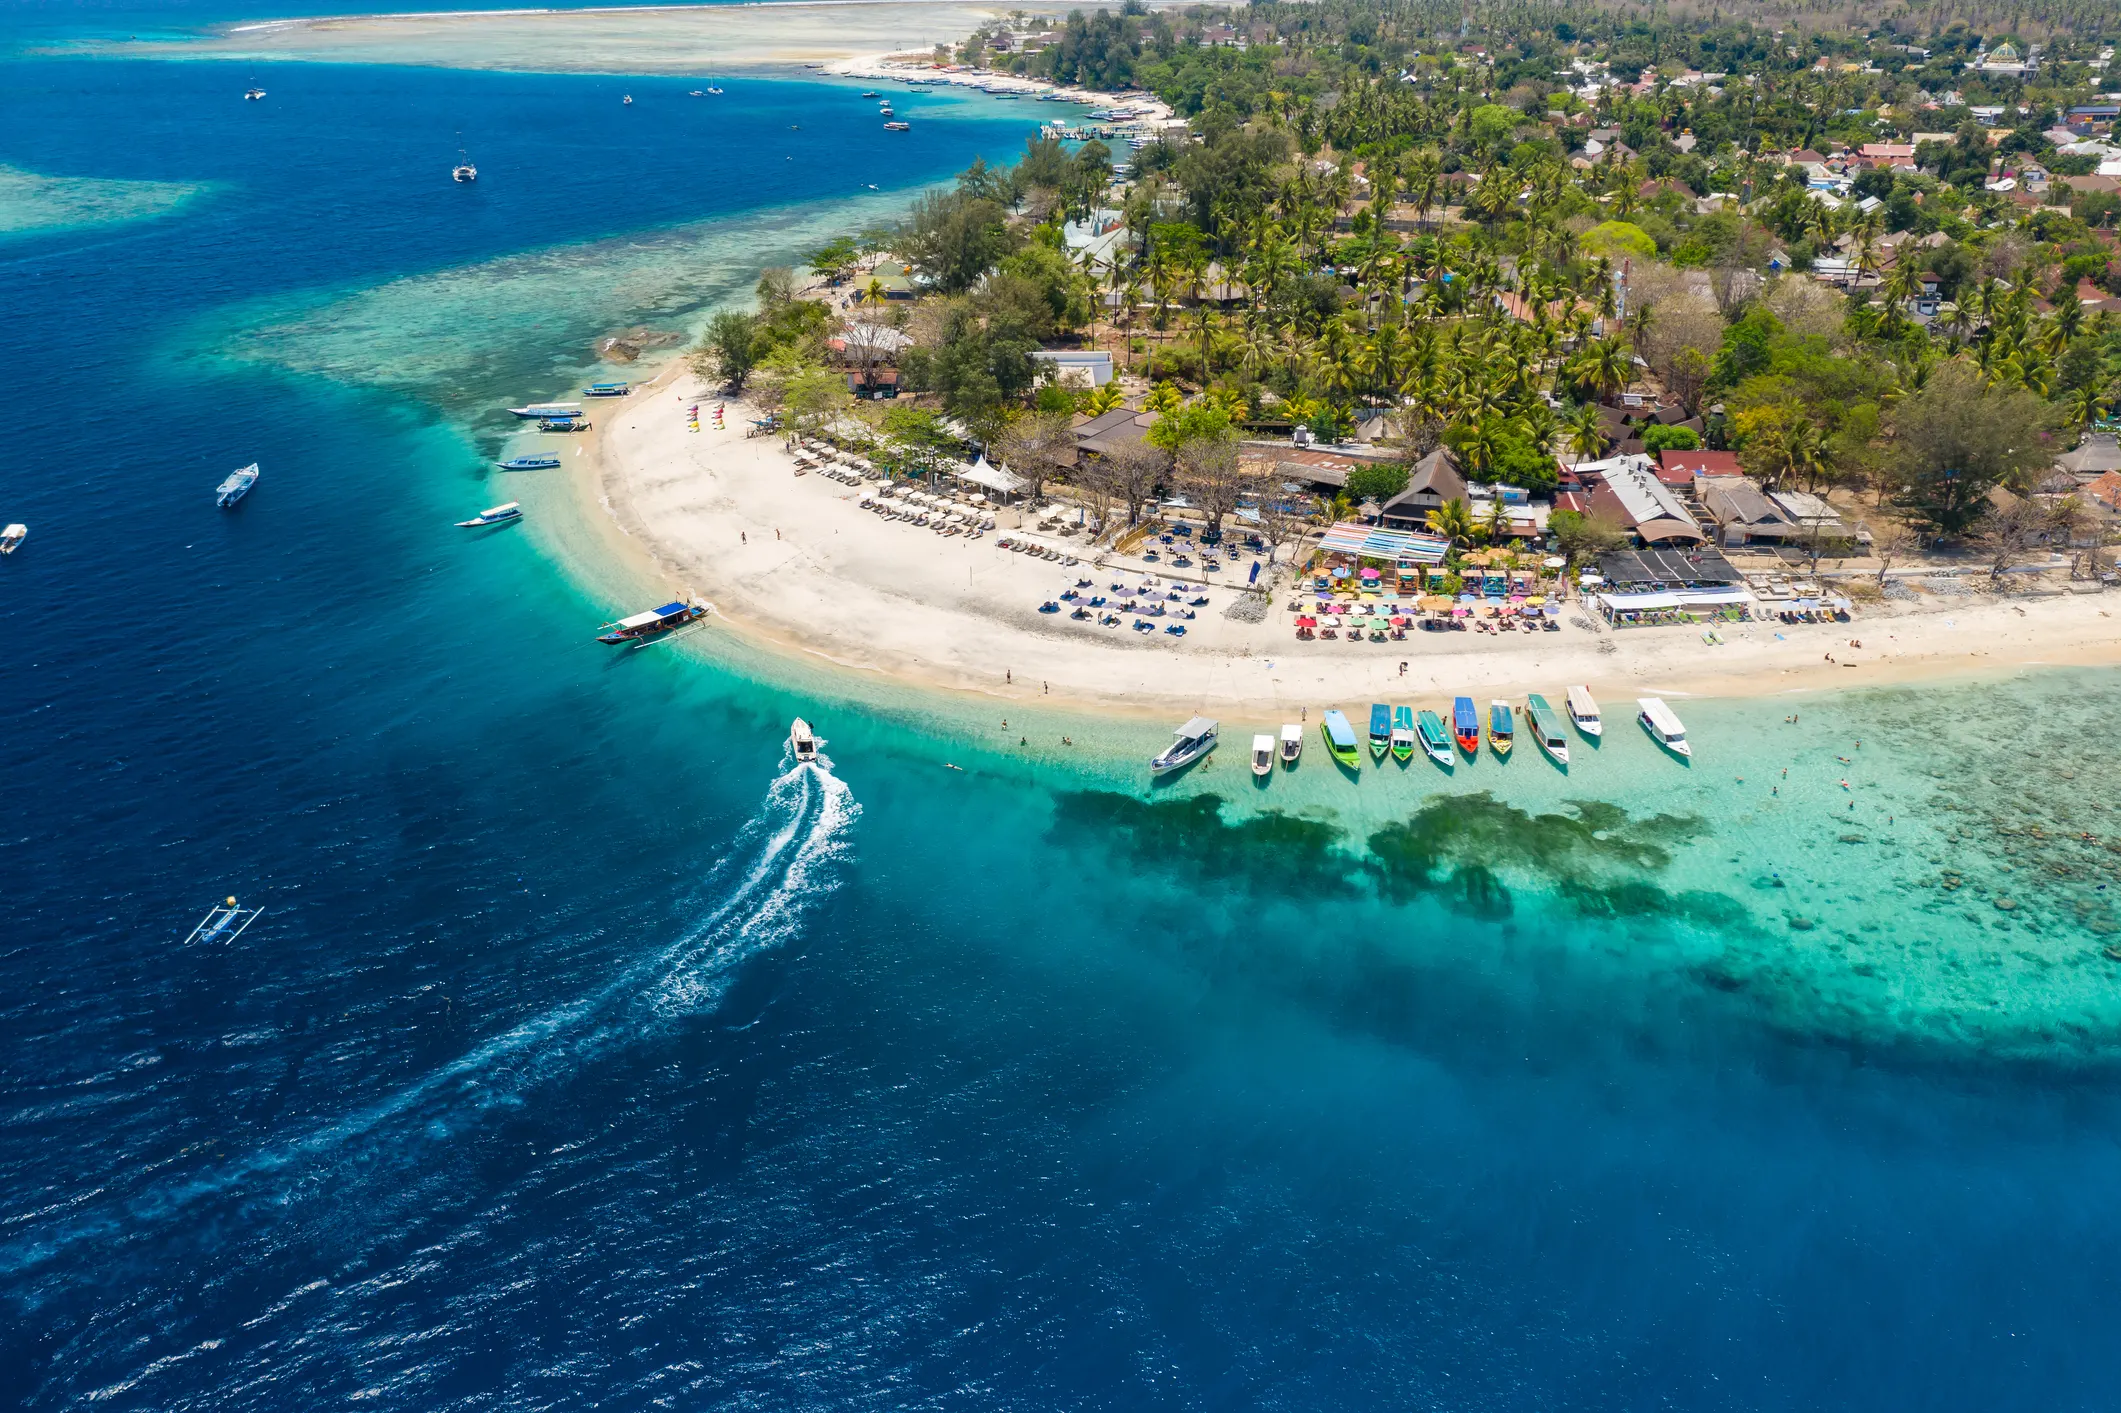 The Gili Islands are popular for their stunning beaches and world-class diving.